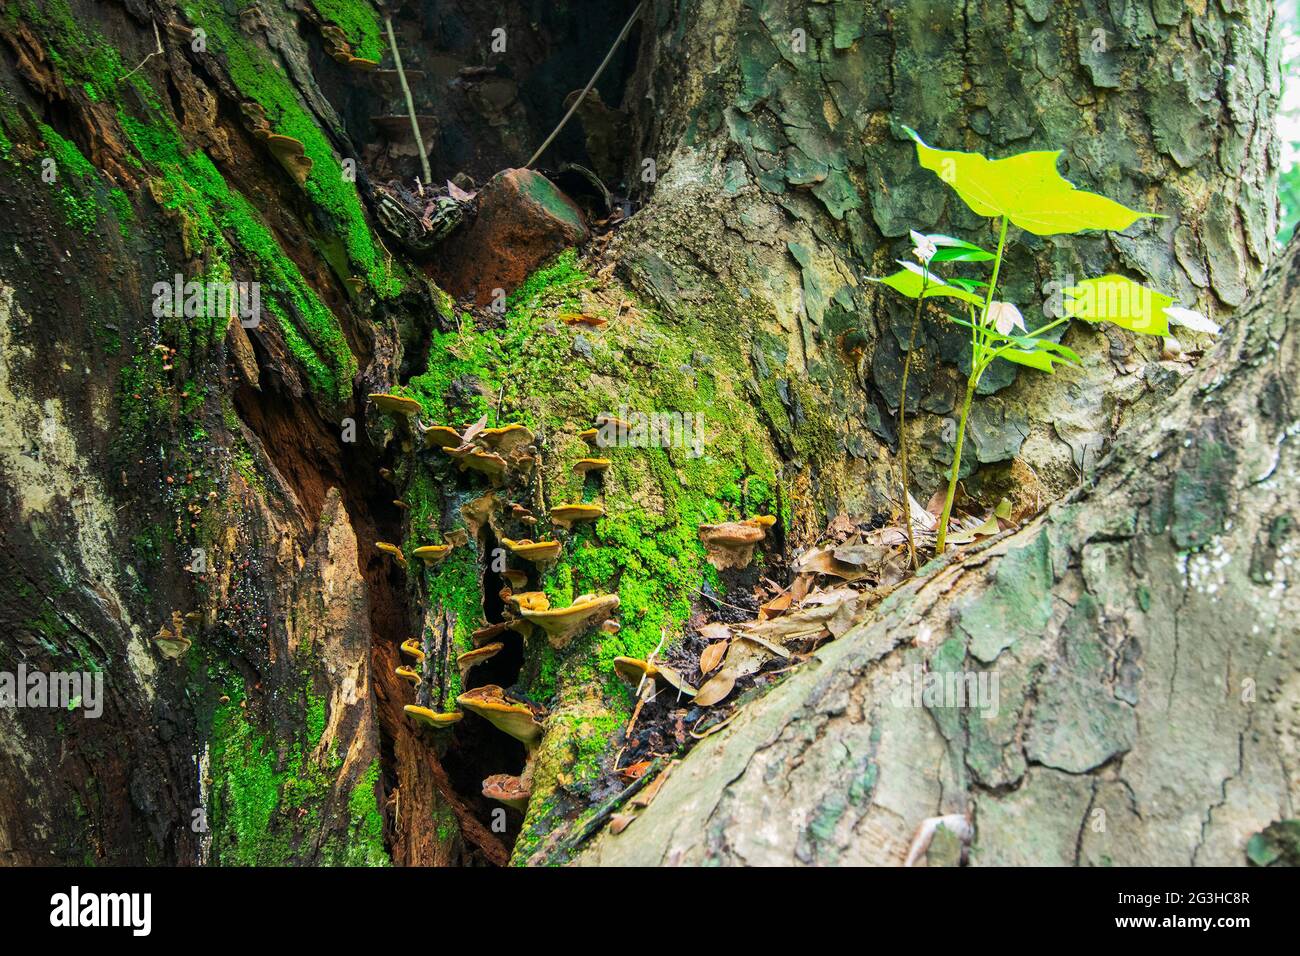 Fungus and green leaves, nature stock image - shot at Shibpur, Howrah, West Bengal, India Stock Photo